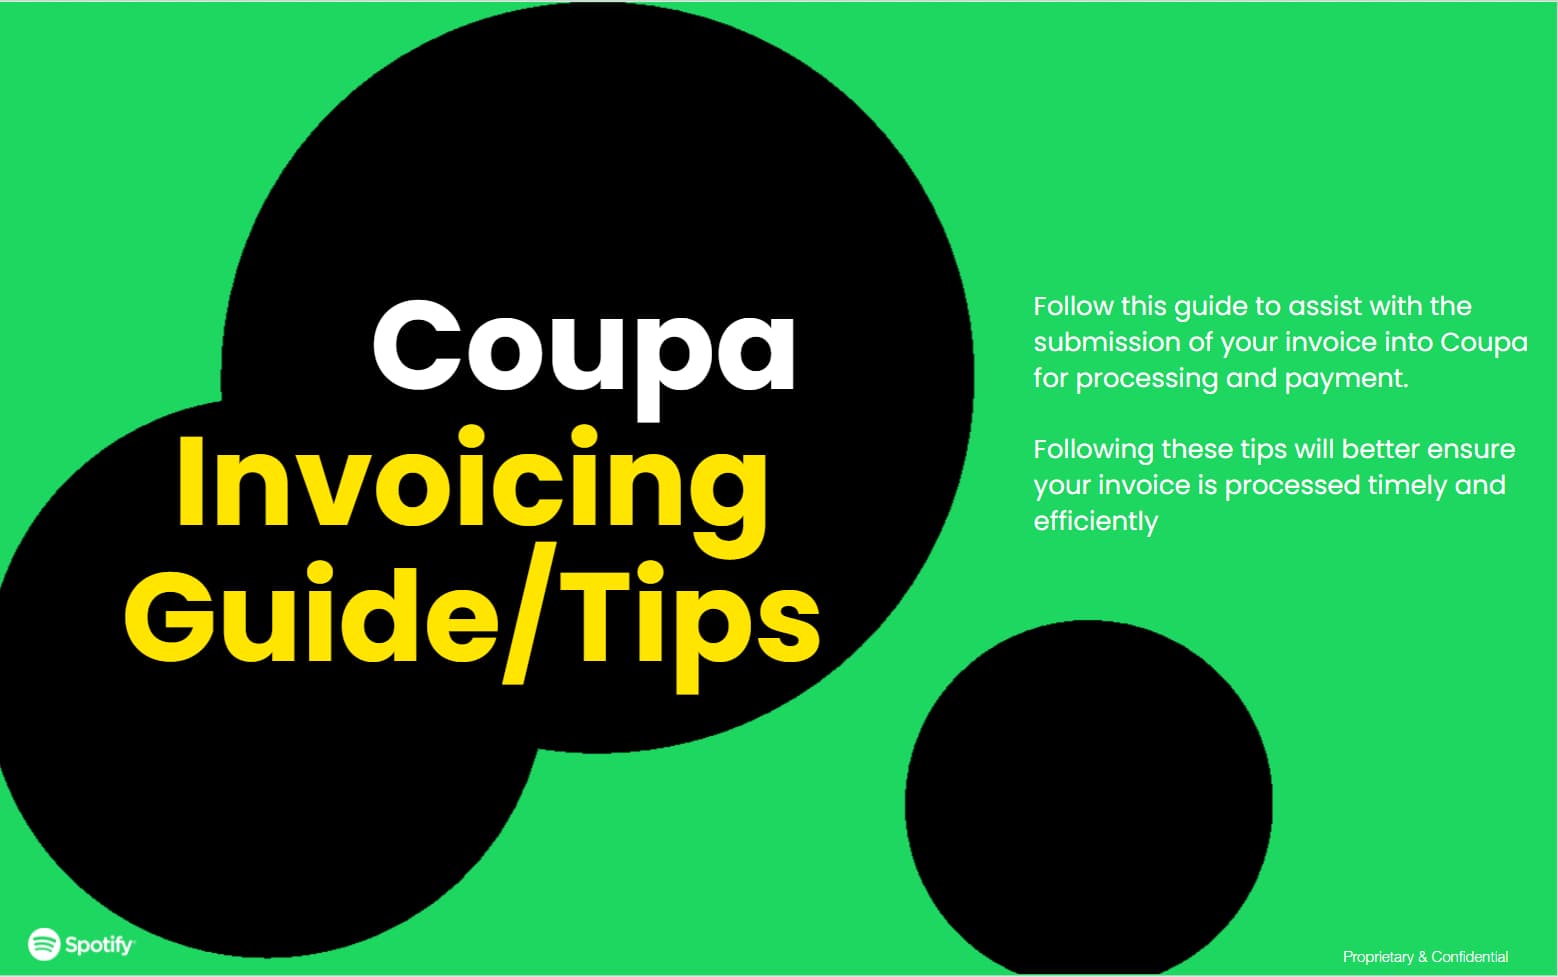 Streamlining operations as of April 11 2022, Spotify is enabling Coupa Compliant e-invoicing for suppliers based in United States